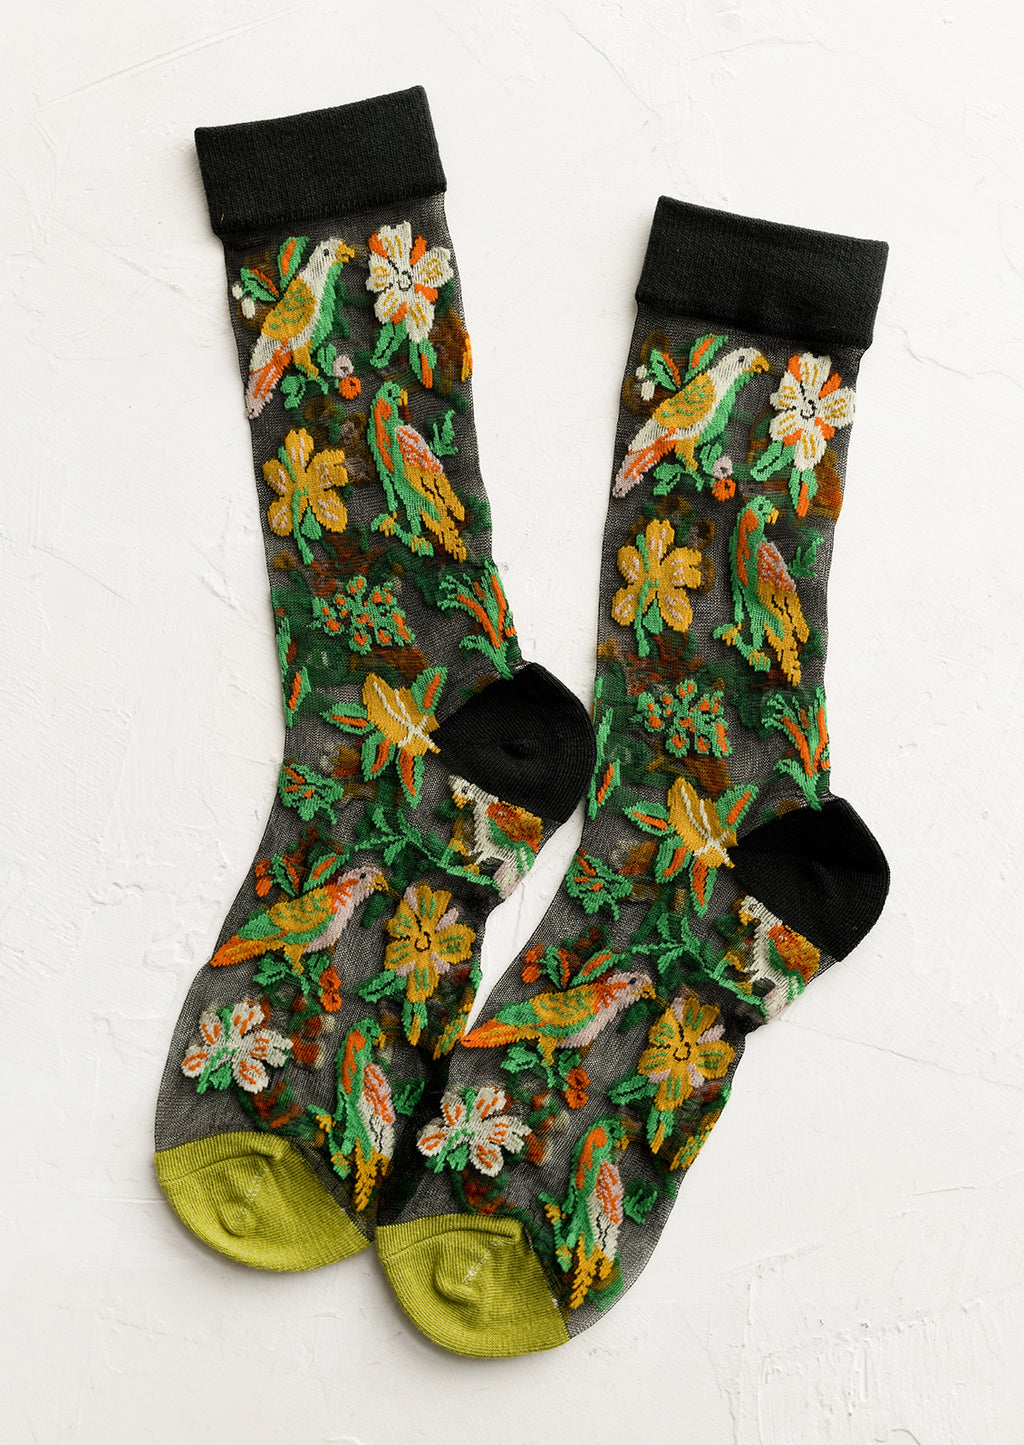 1: A pair of sheer black socks with tropical parrot print.